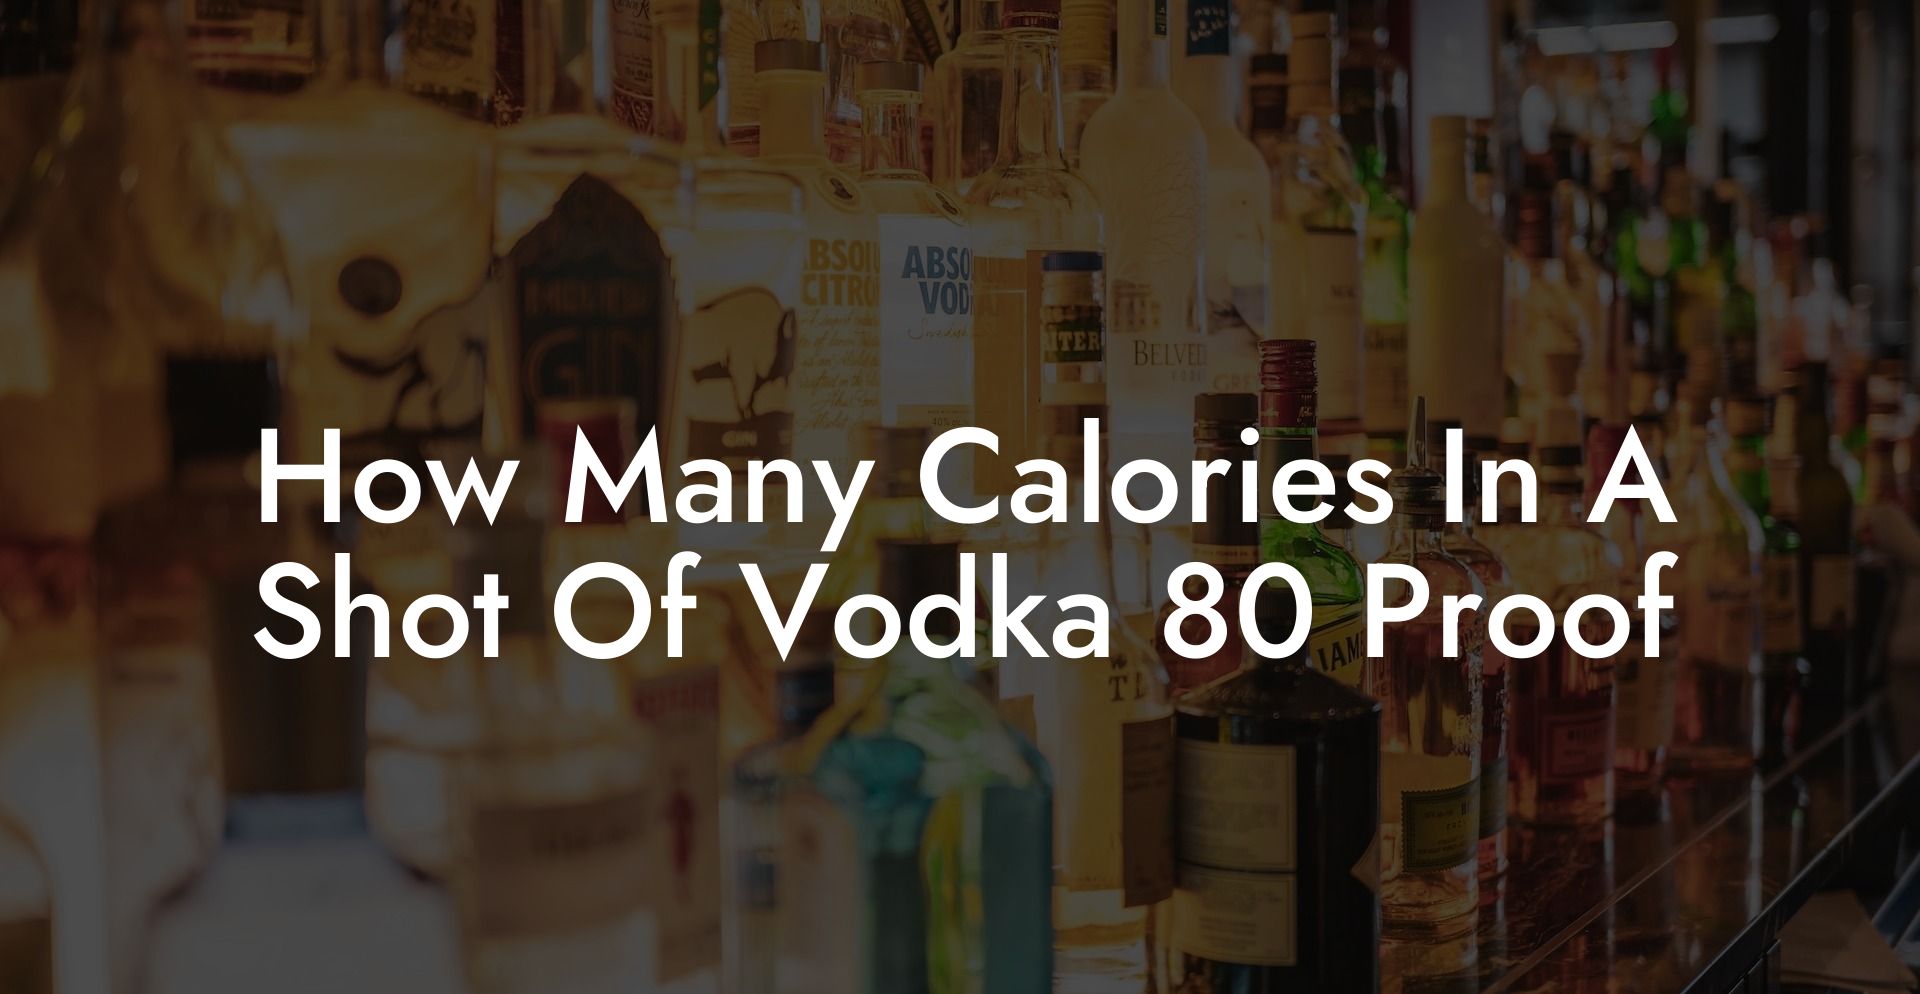 How Many Calories In A Shot Of Vodka 80 Proof